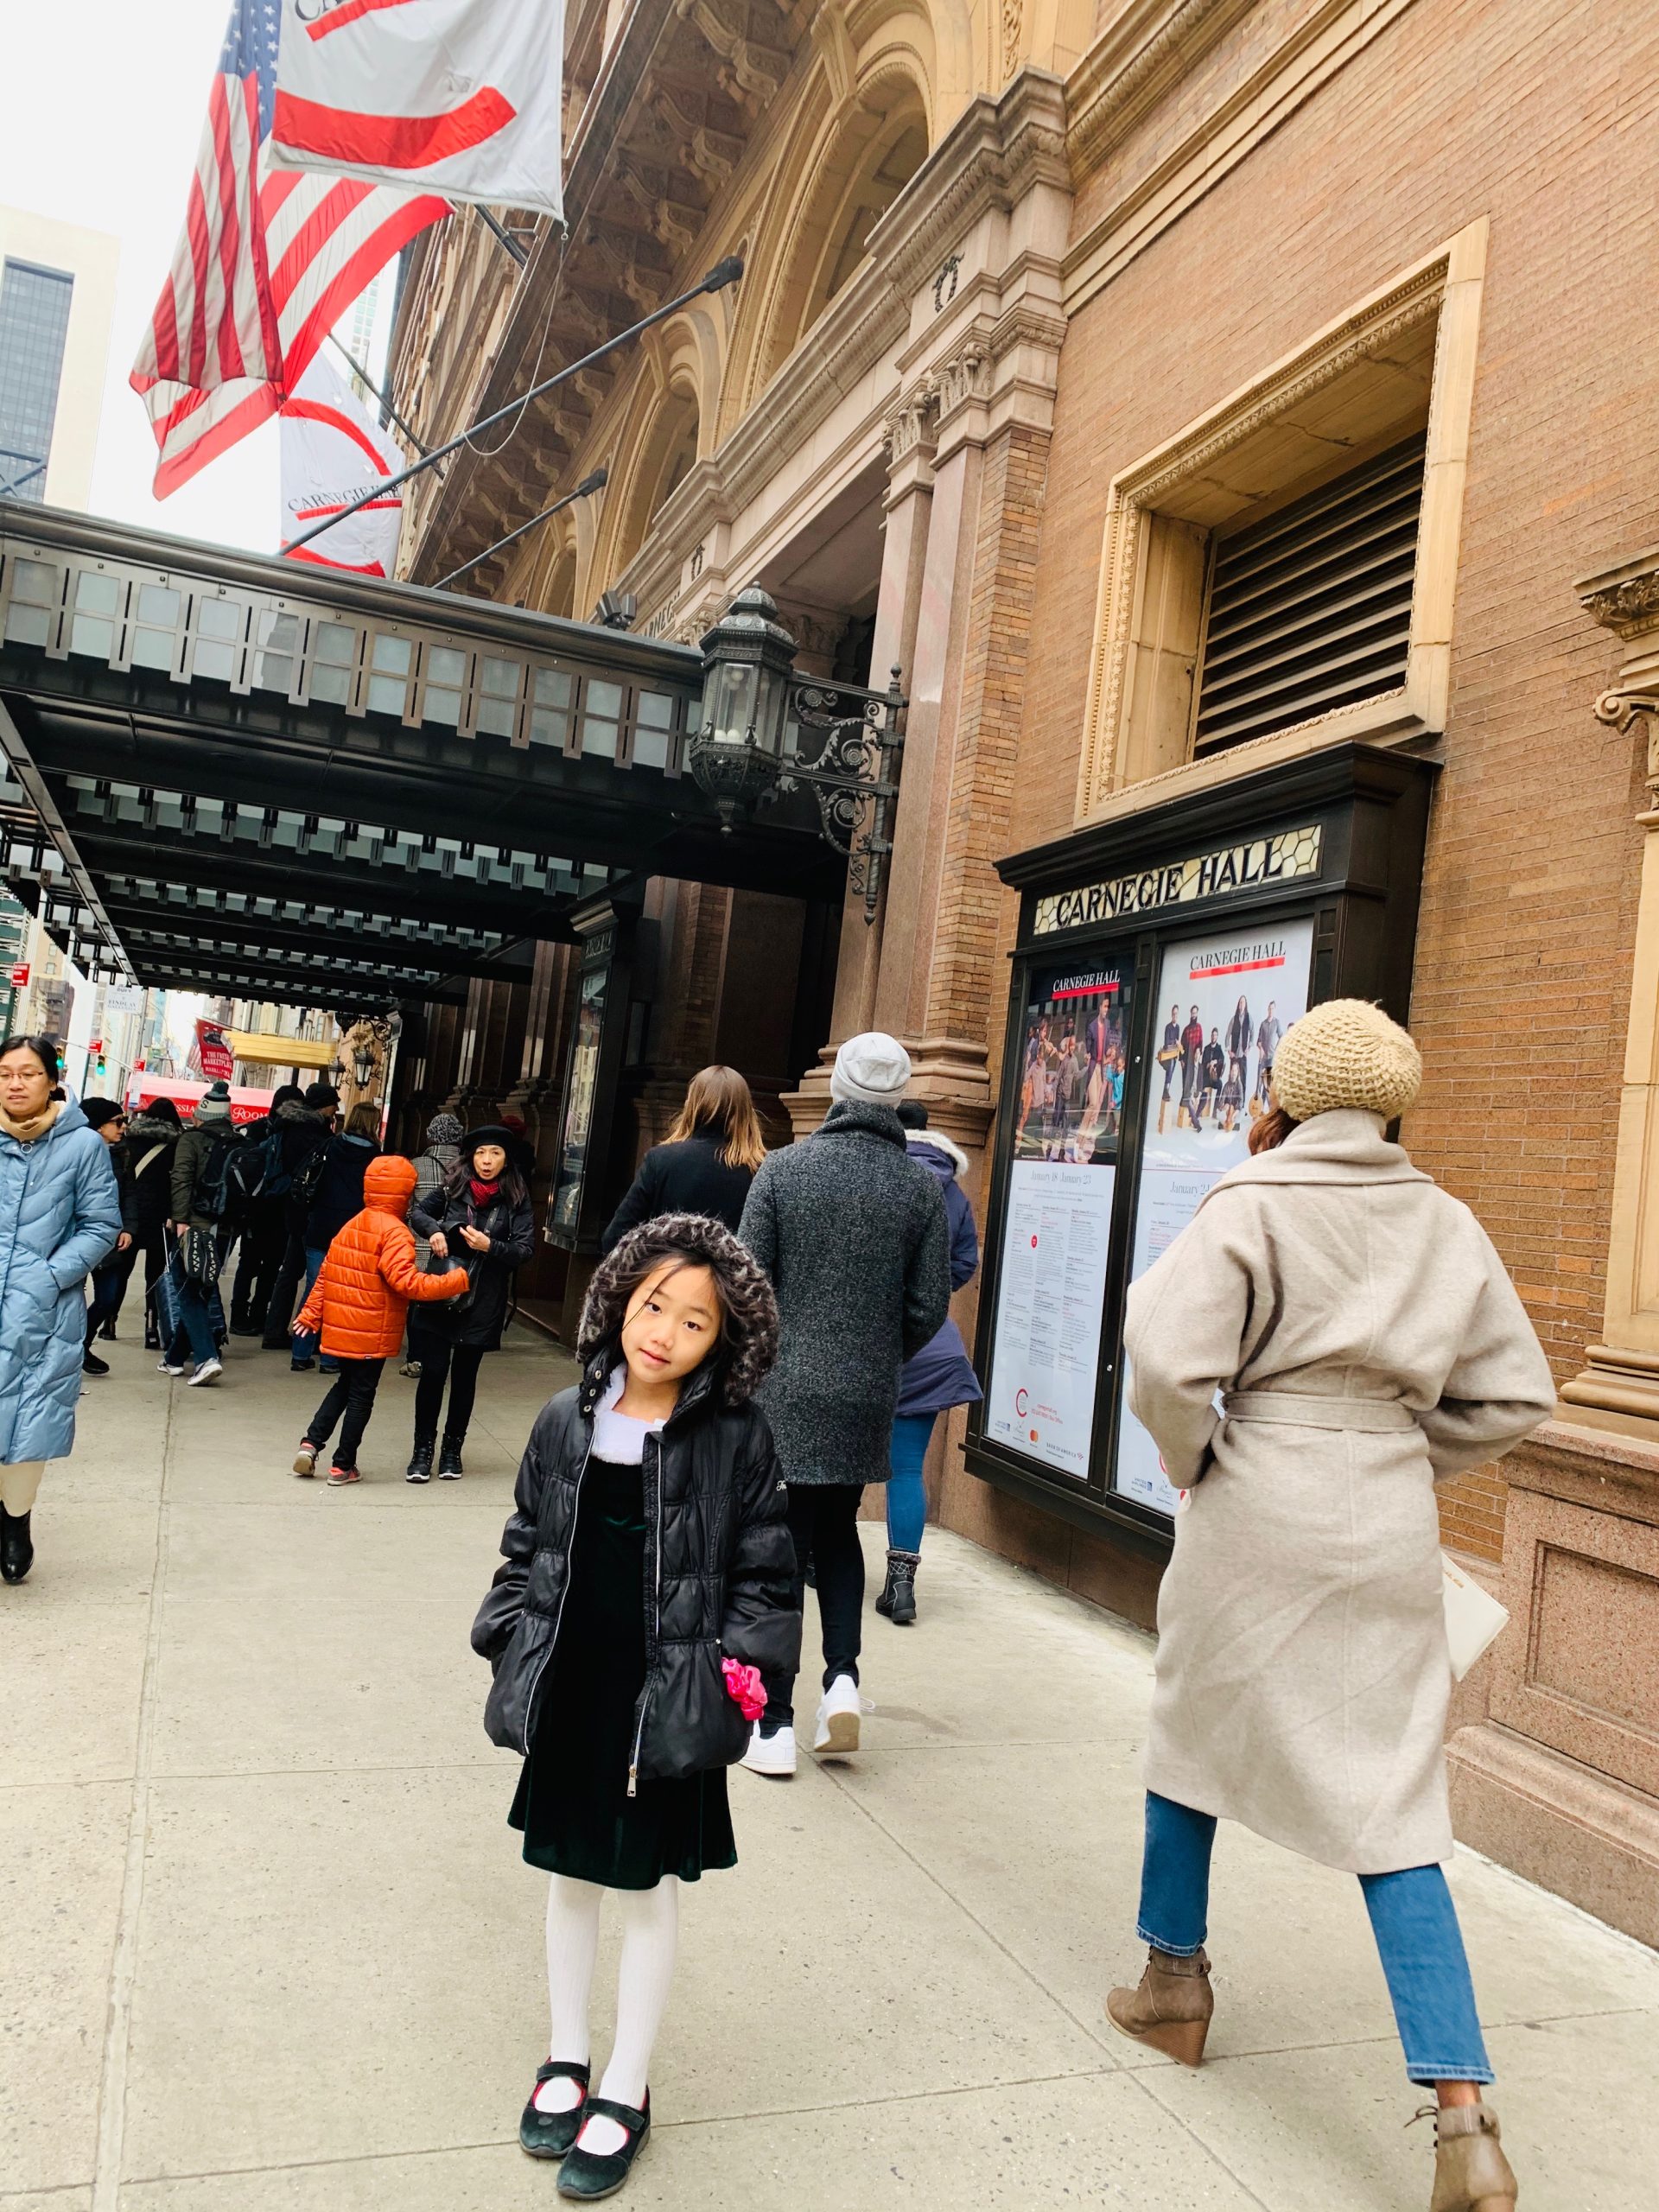 You are currently viewing January 2020 Weekend Event _ Musical Explorers Family Concert @ Carnegie Hall 卡內基廳音樂探險家親子音樂會